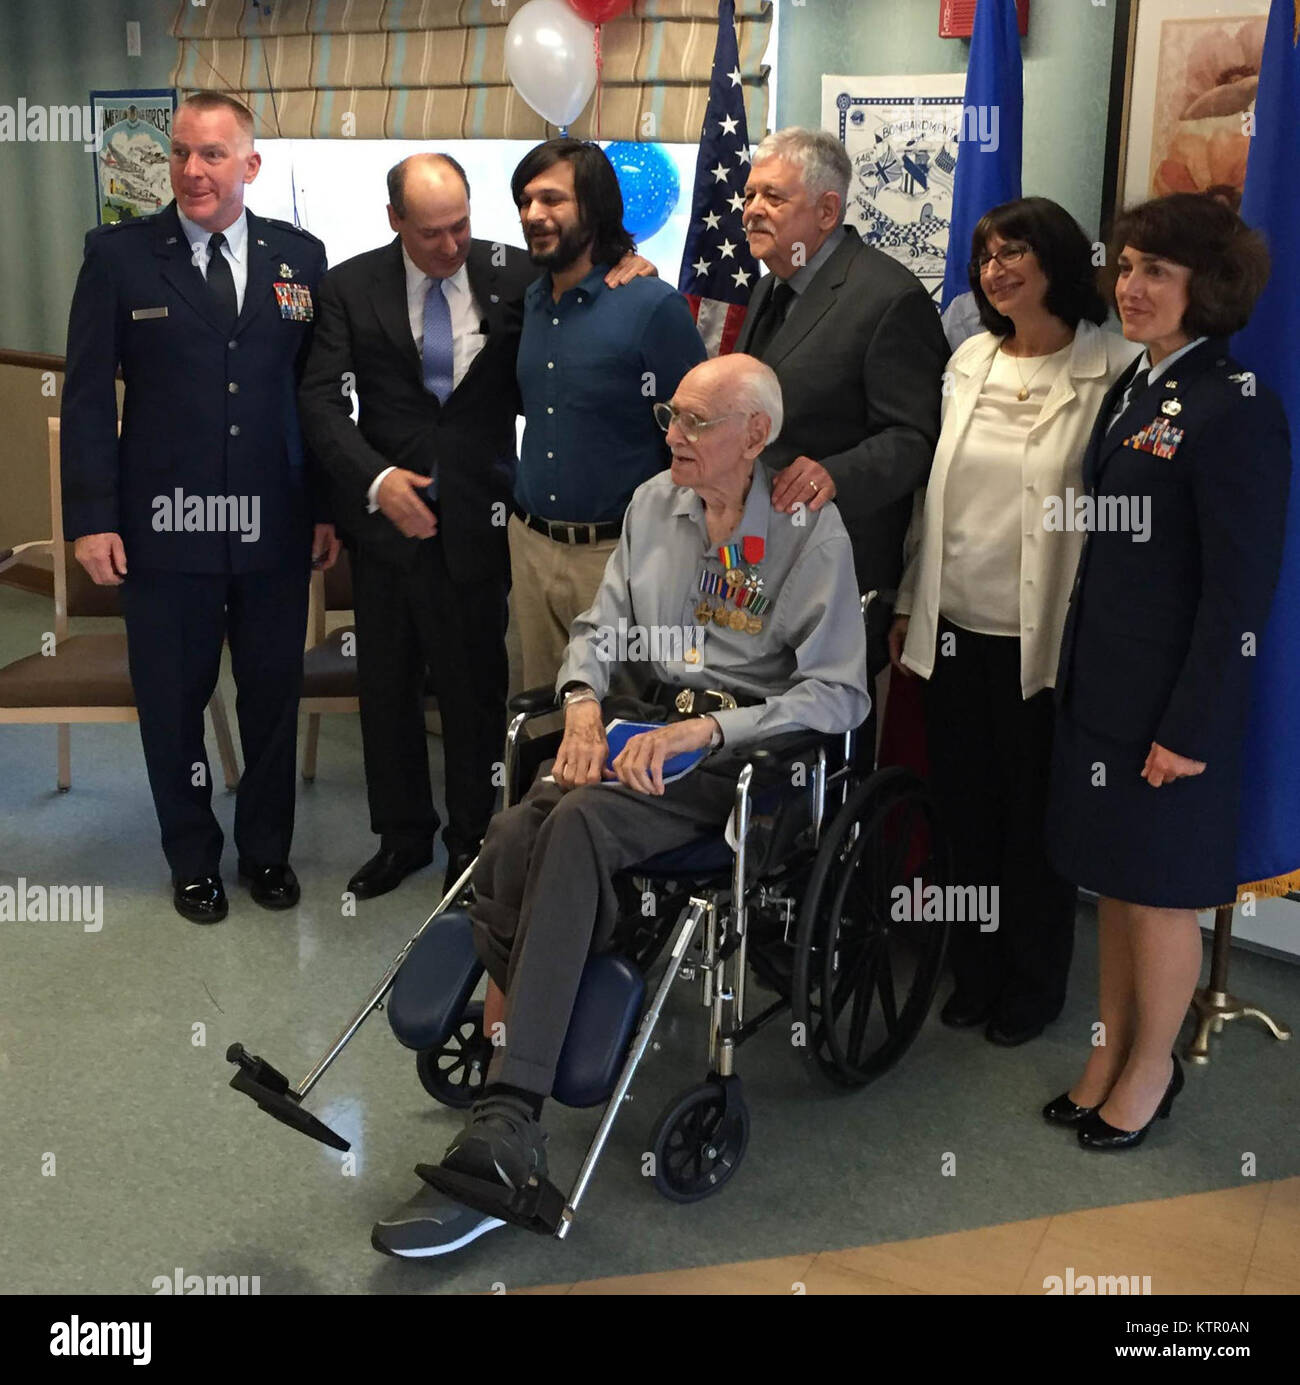 New York Air National Guard Brig. Gen. Thomas Owens (left), the Deputy Adjutant General for Air; French representative Col Frederic Vigneron; and Col. Mauren Murphy, Chief of Staff of the New York Air National Guard (far right)  pose with former United States Army Air Forces Capt. Harold Smith,age 98,  and his family at the Garden Care Health Facility in  Franklin Square, N.Y. on June 6, 2016. Vigneron presented Smith with the French Legion of Honor in recognition of the war the one-time B-24 and B-29 navigator played in Liberating France from German occupation during World War II. Smith, who  Stock Photo